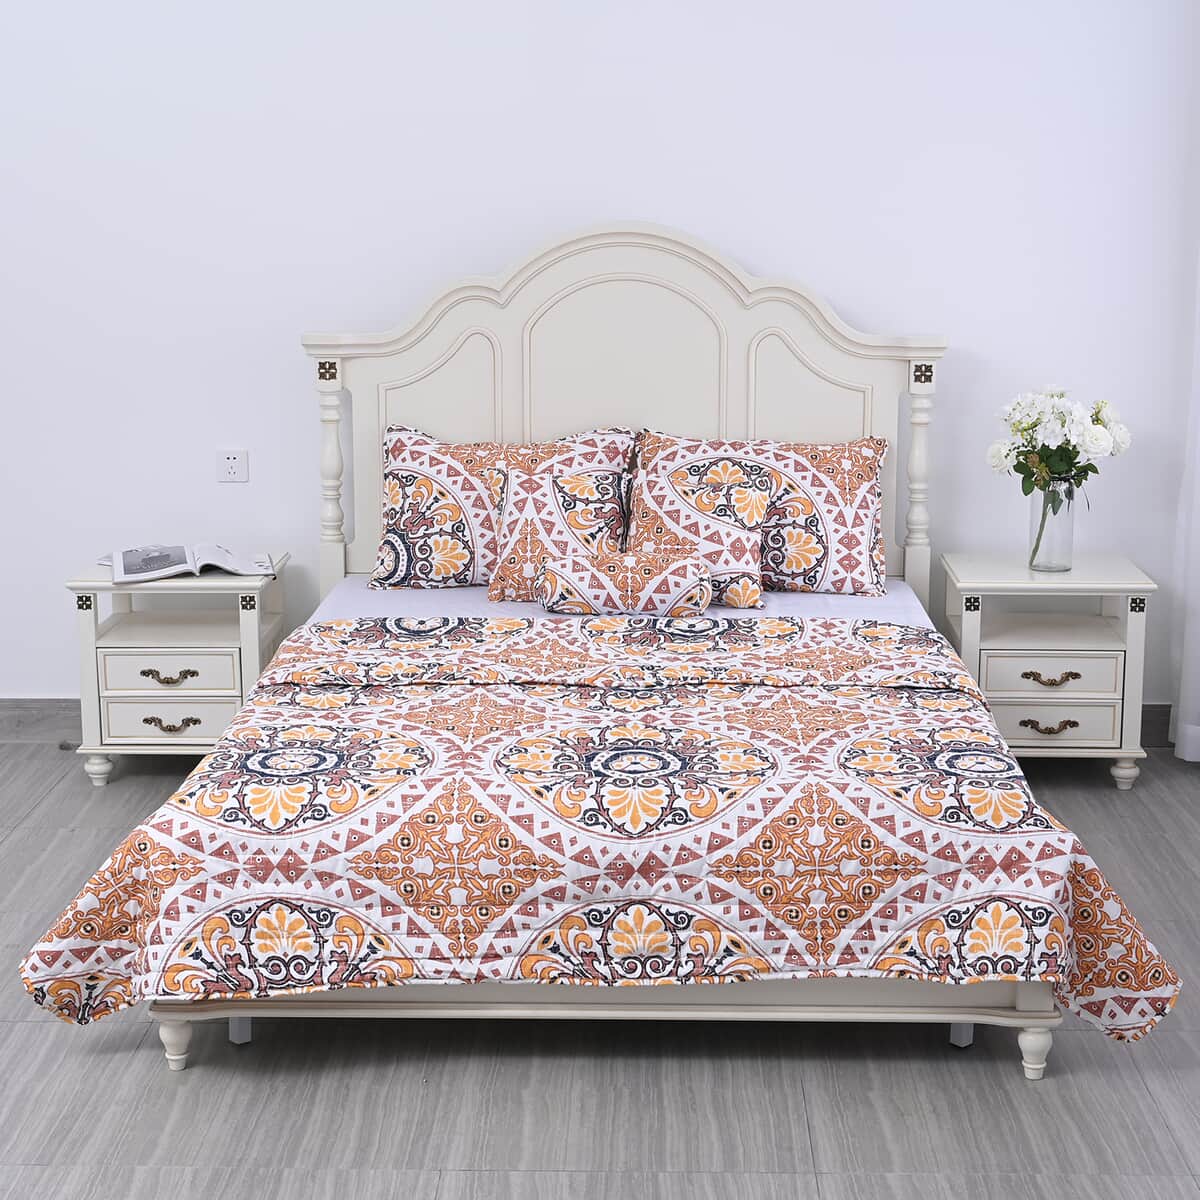 HOMESMART Yellow and Brick Flower Printed 6pcs Quilt Set - Queen (100% Microfiber) image number 1